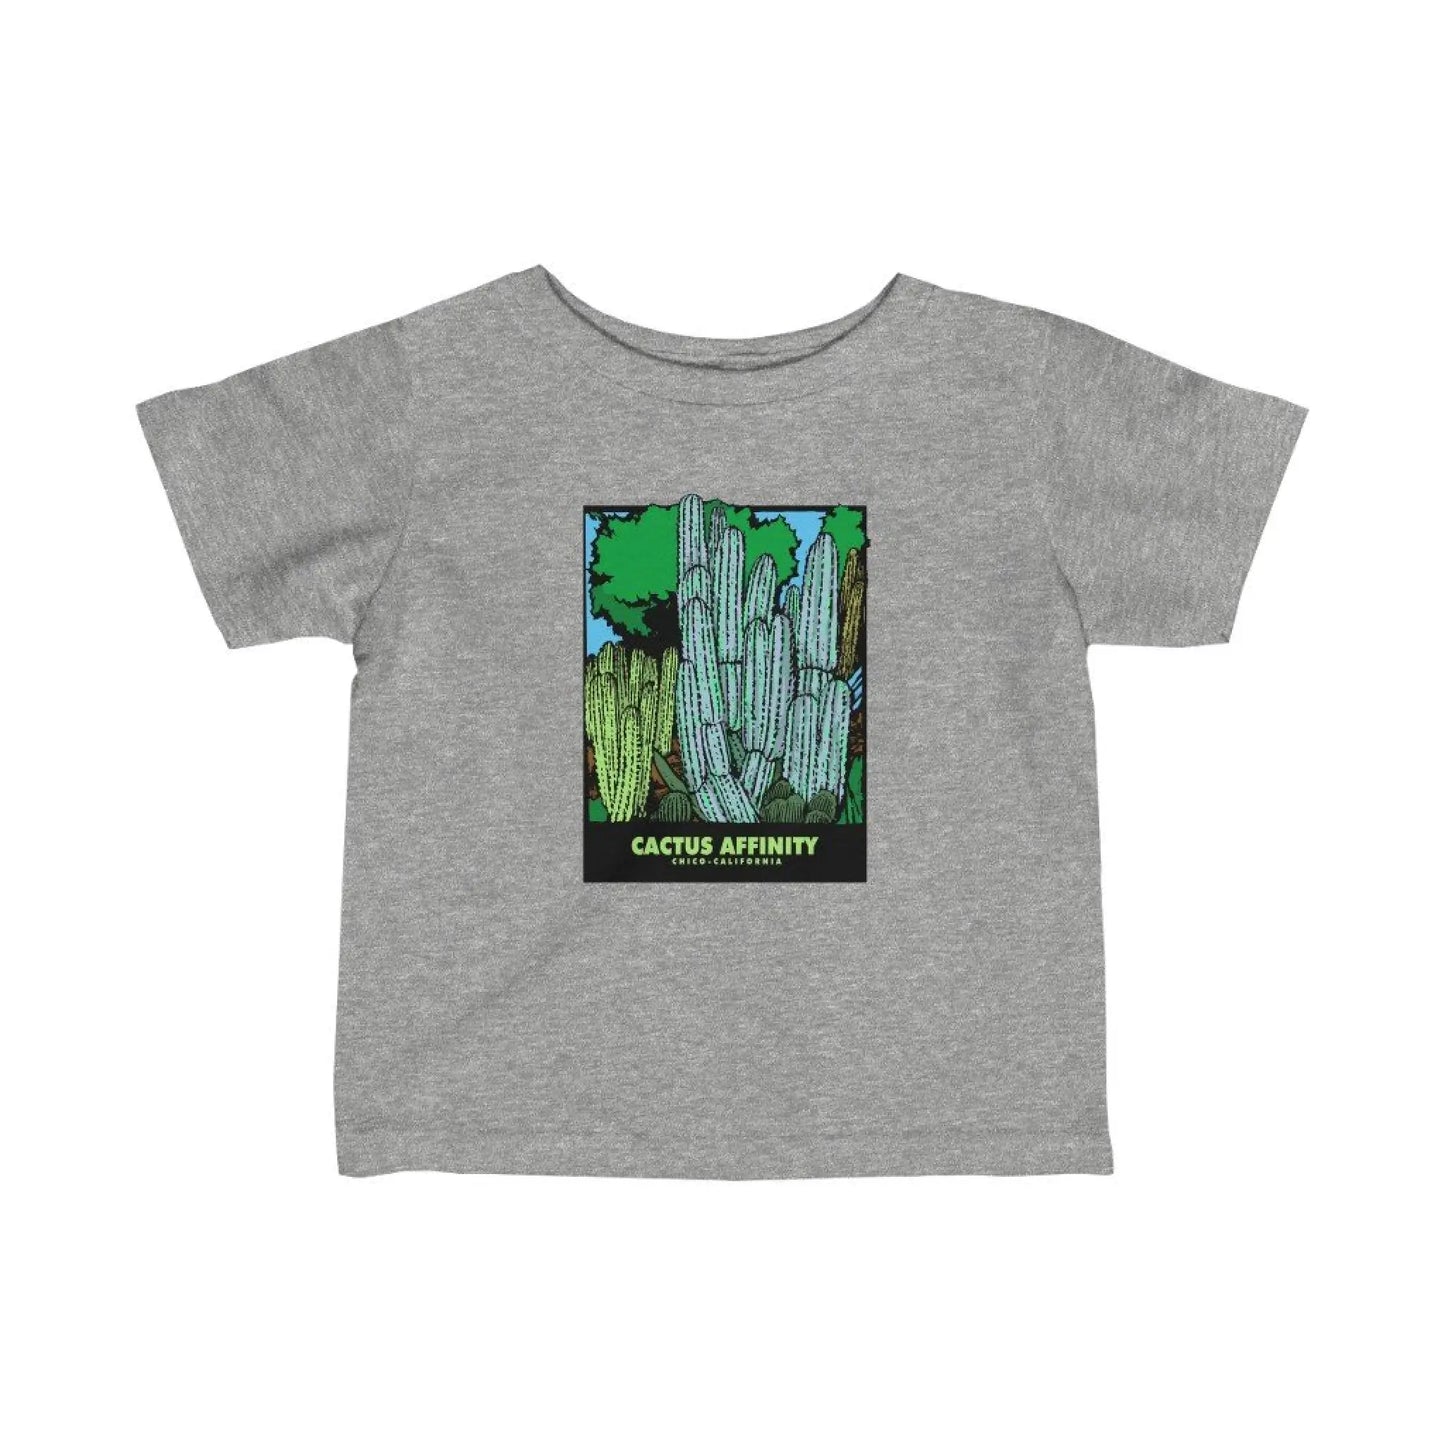 Infant Tee - Chico - Heather / 12M - Kids clothes